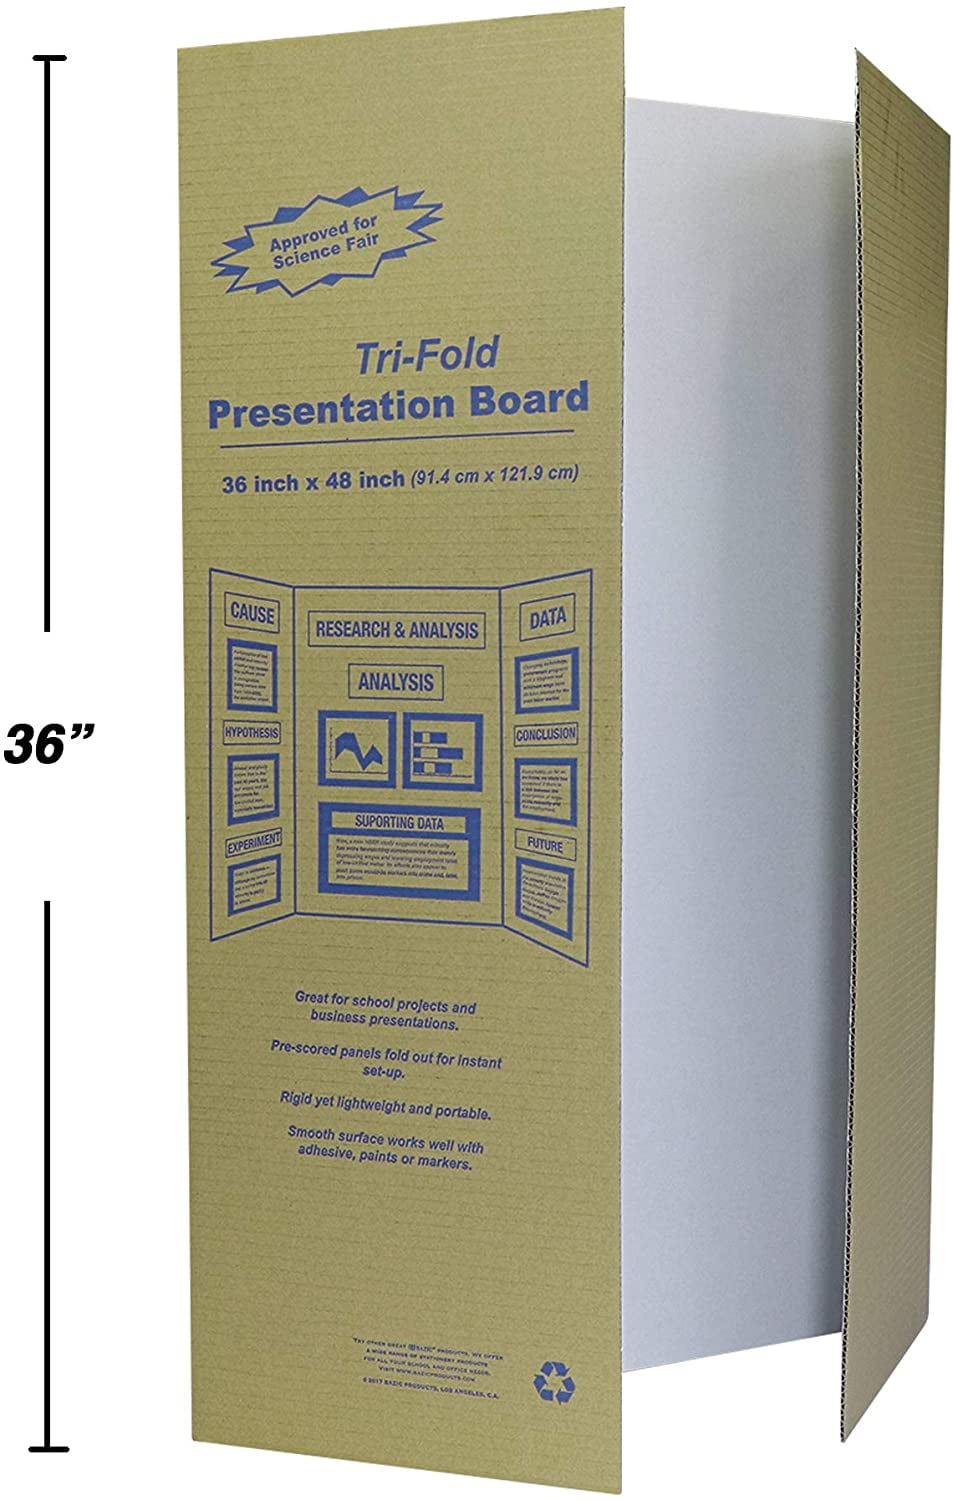 Assorted Colors by Emraw Tri-Fold Presentation Board 36 x 48 Display Exhibition Board Lightweight and Portable with Smooth Surface Great Business presentations 